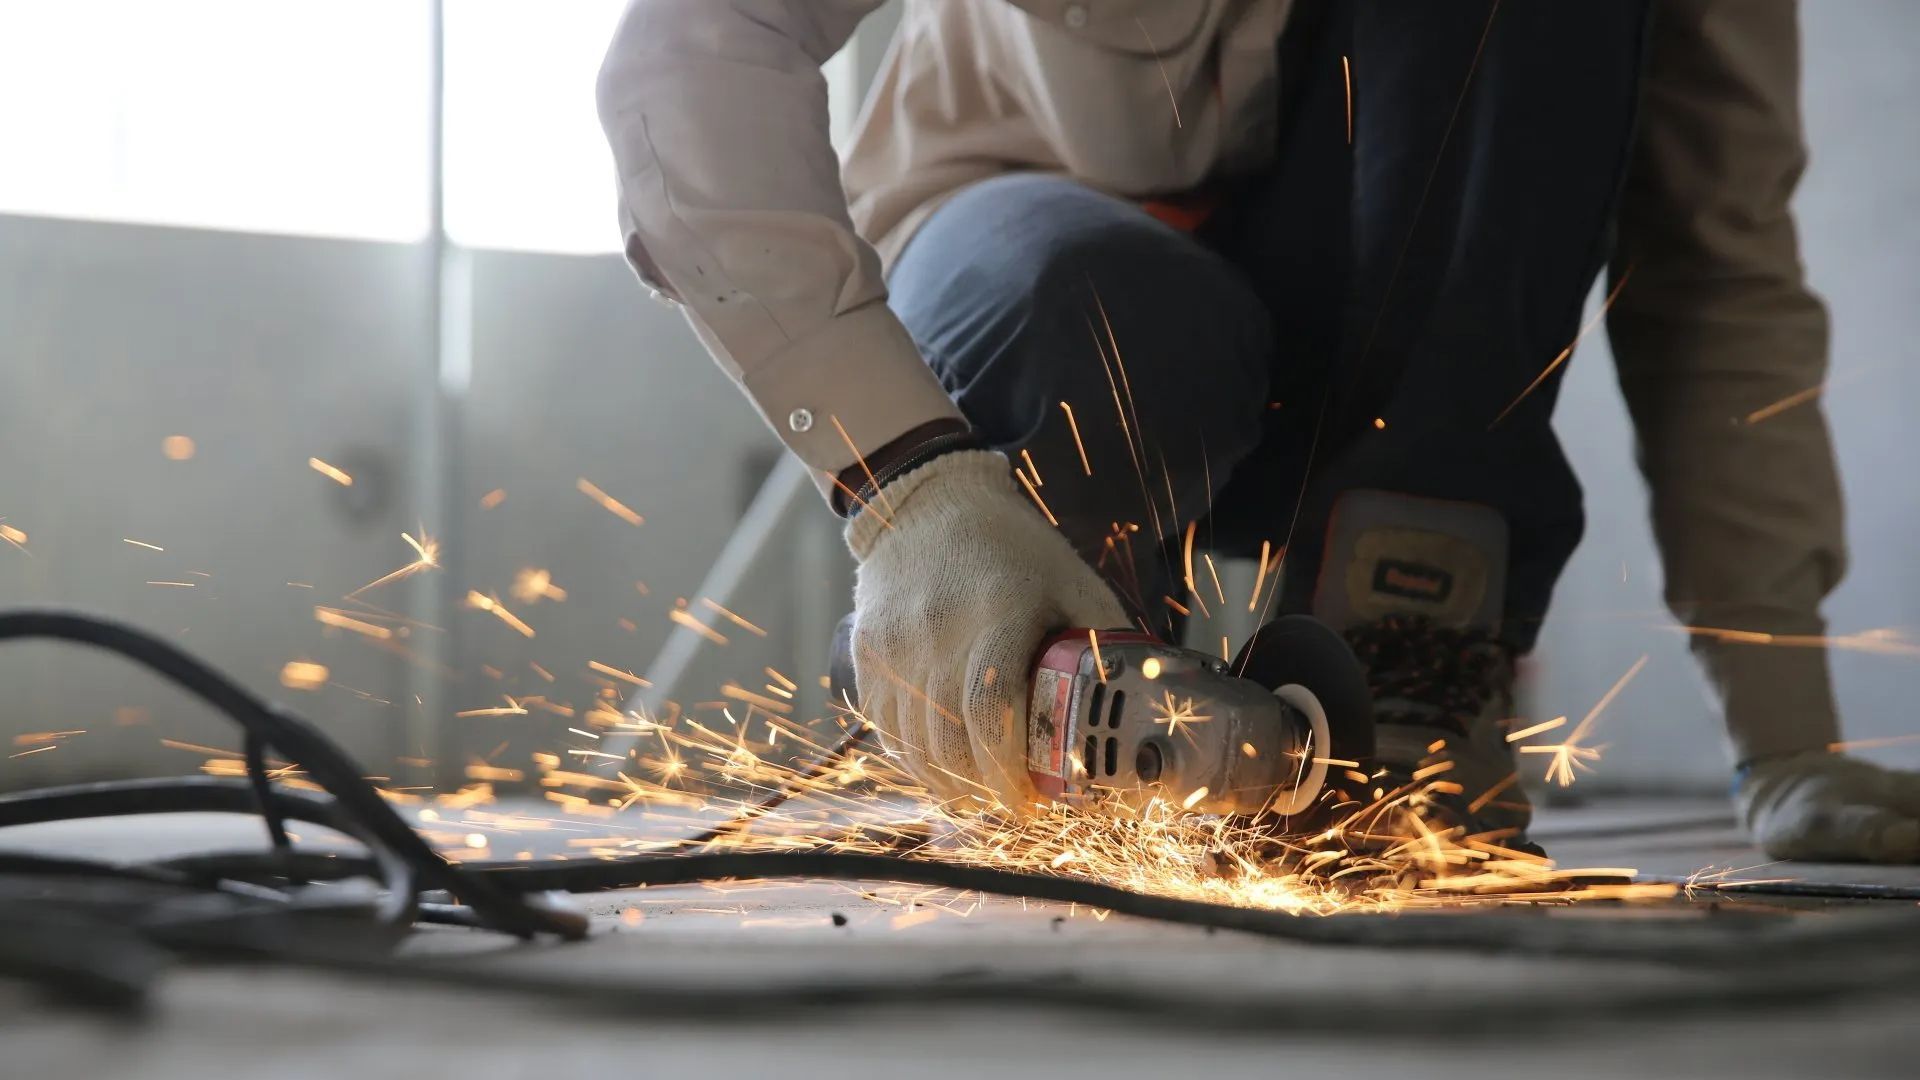 A man is using a grinder to cut a piece of metal.